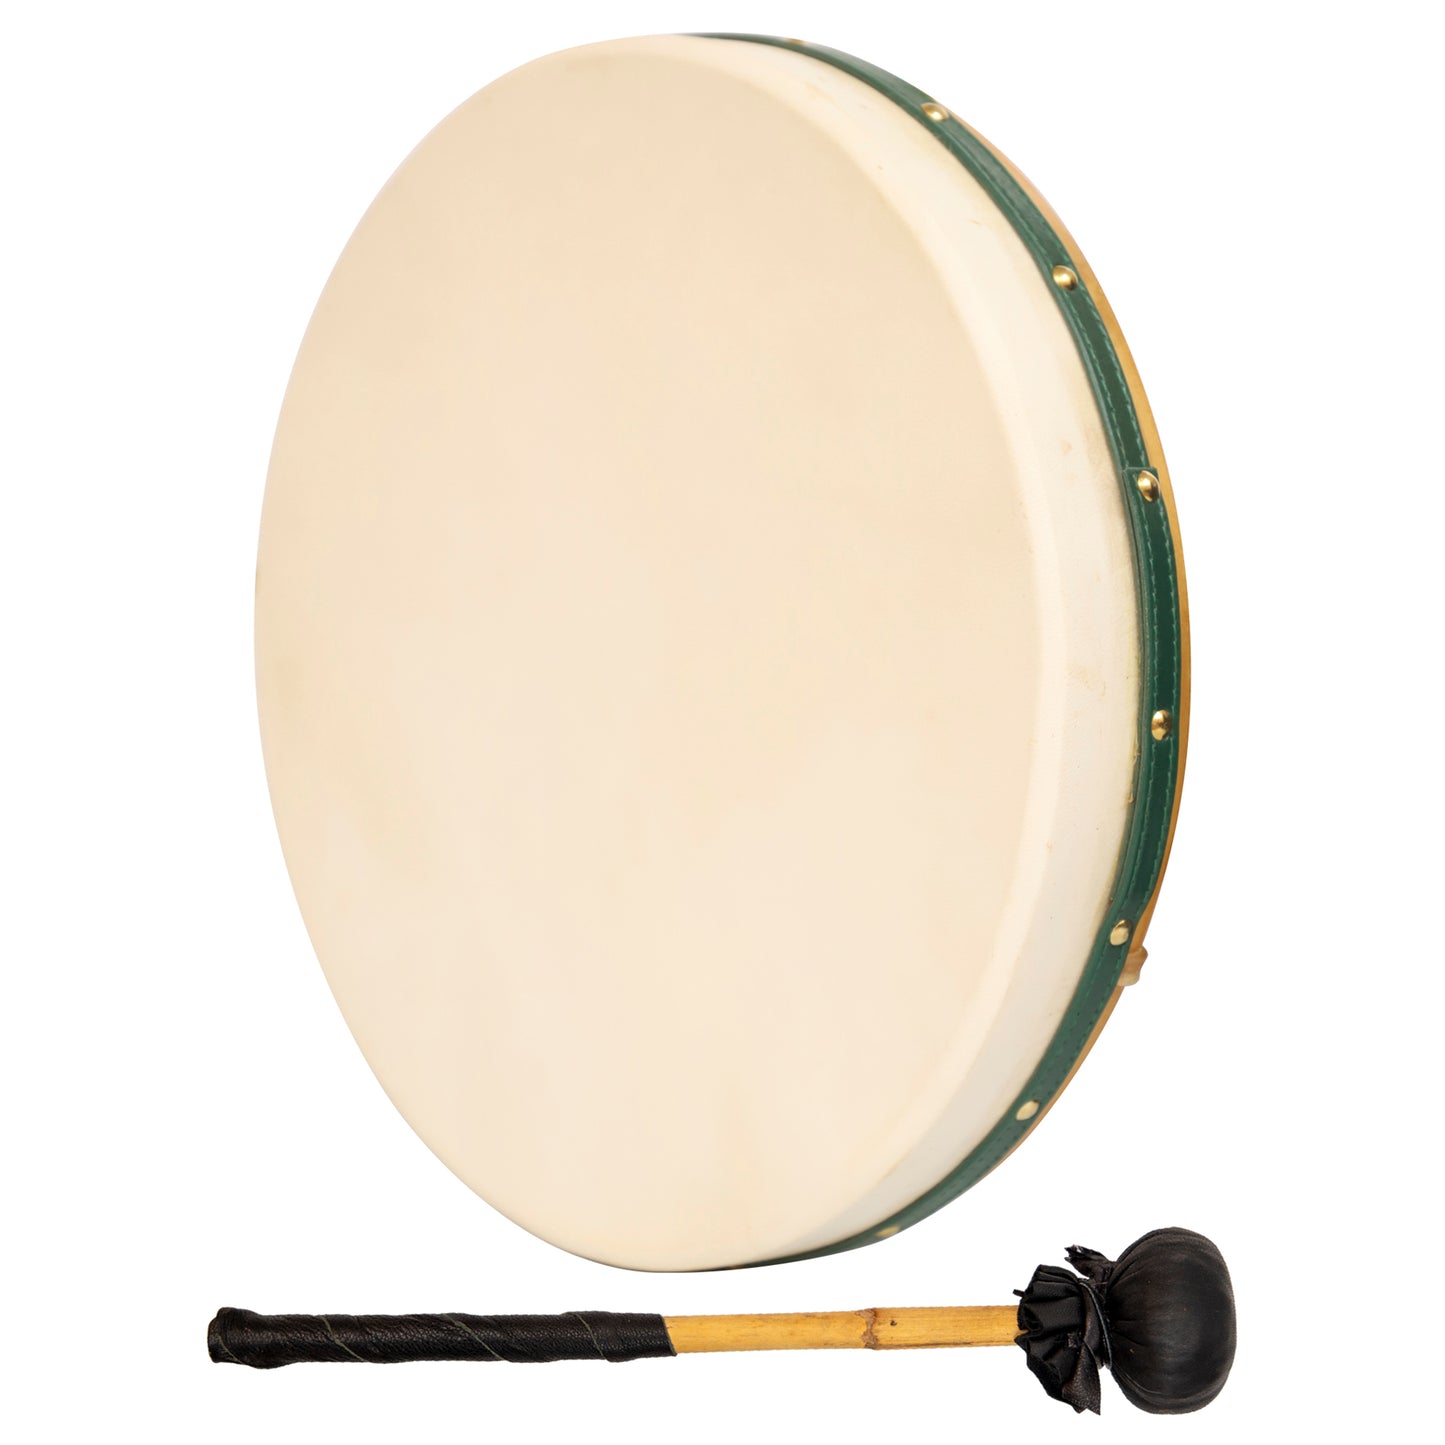 FRAME DRUM 14 INCH TUNABLE MULBERRY